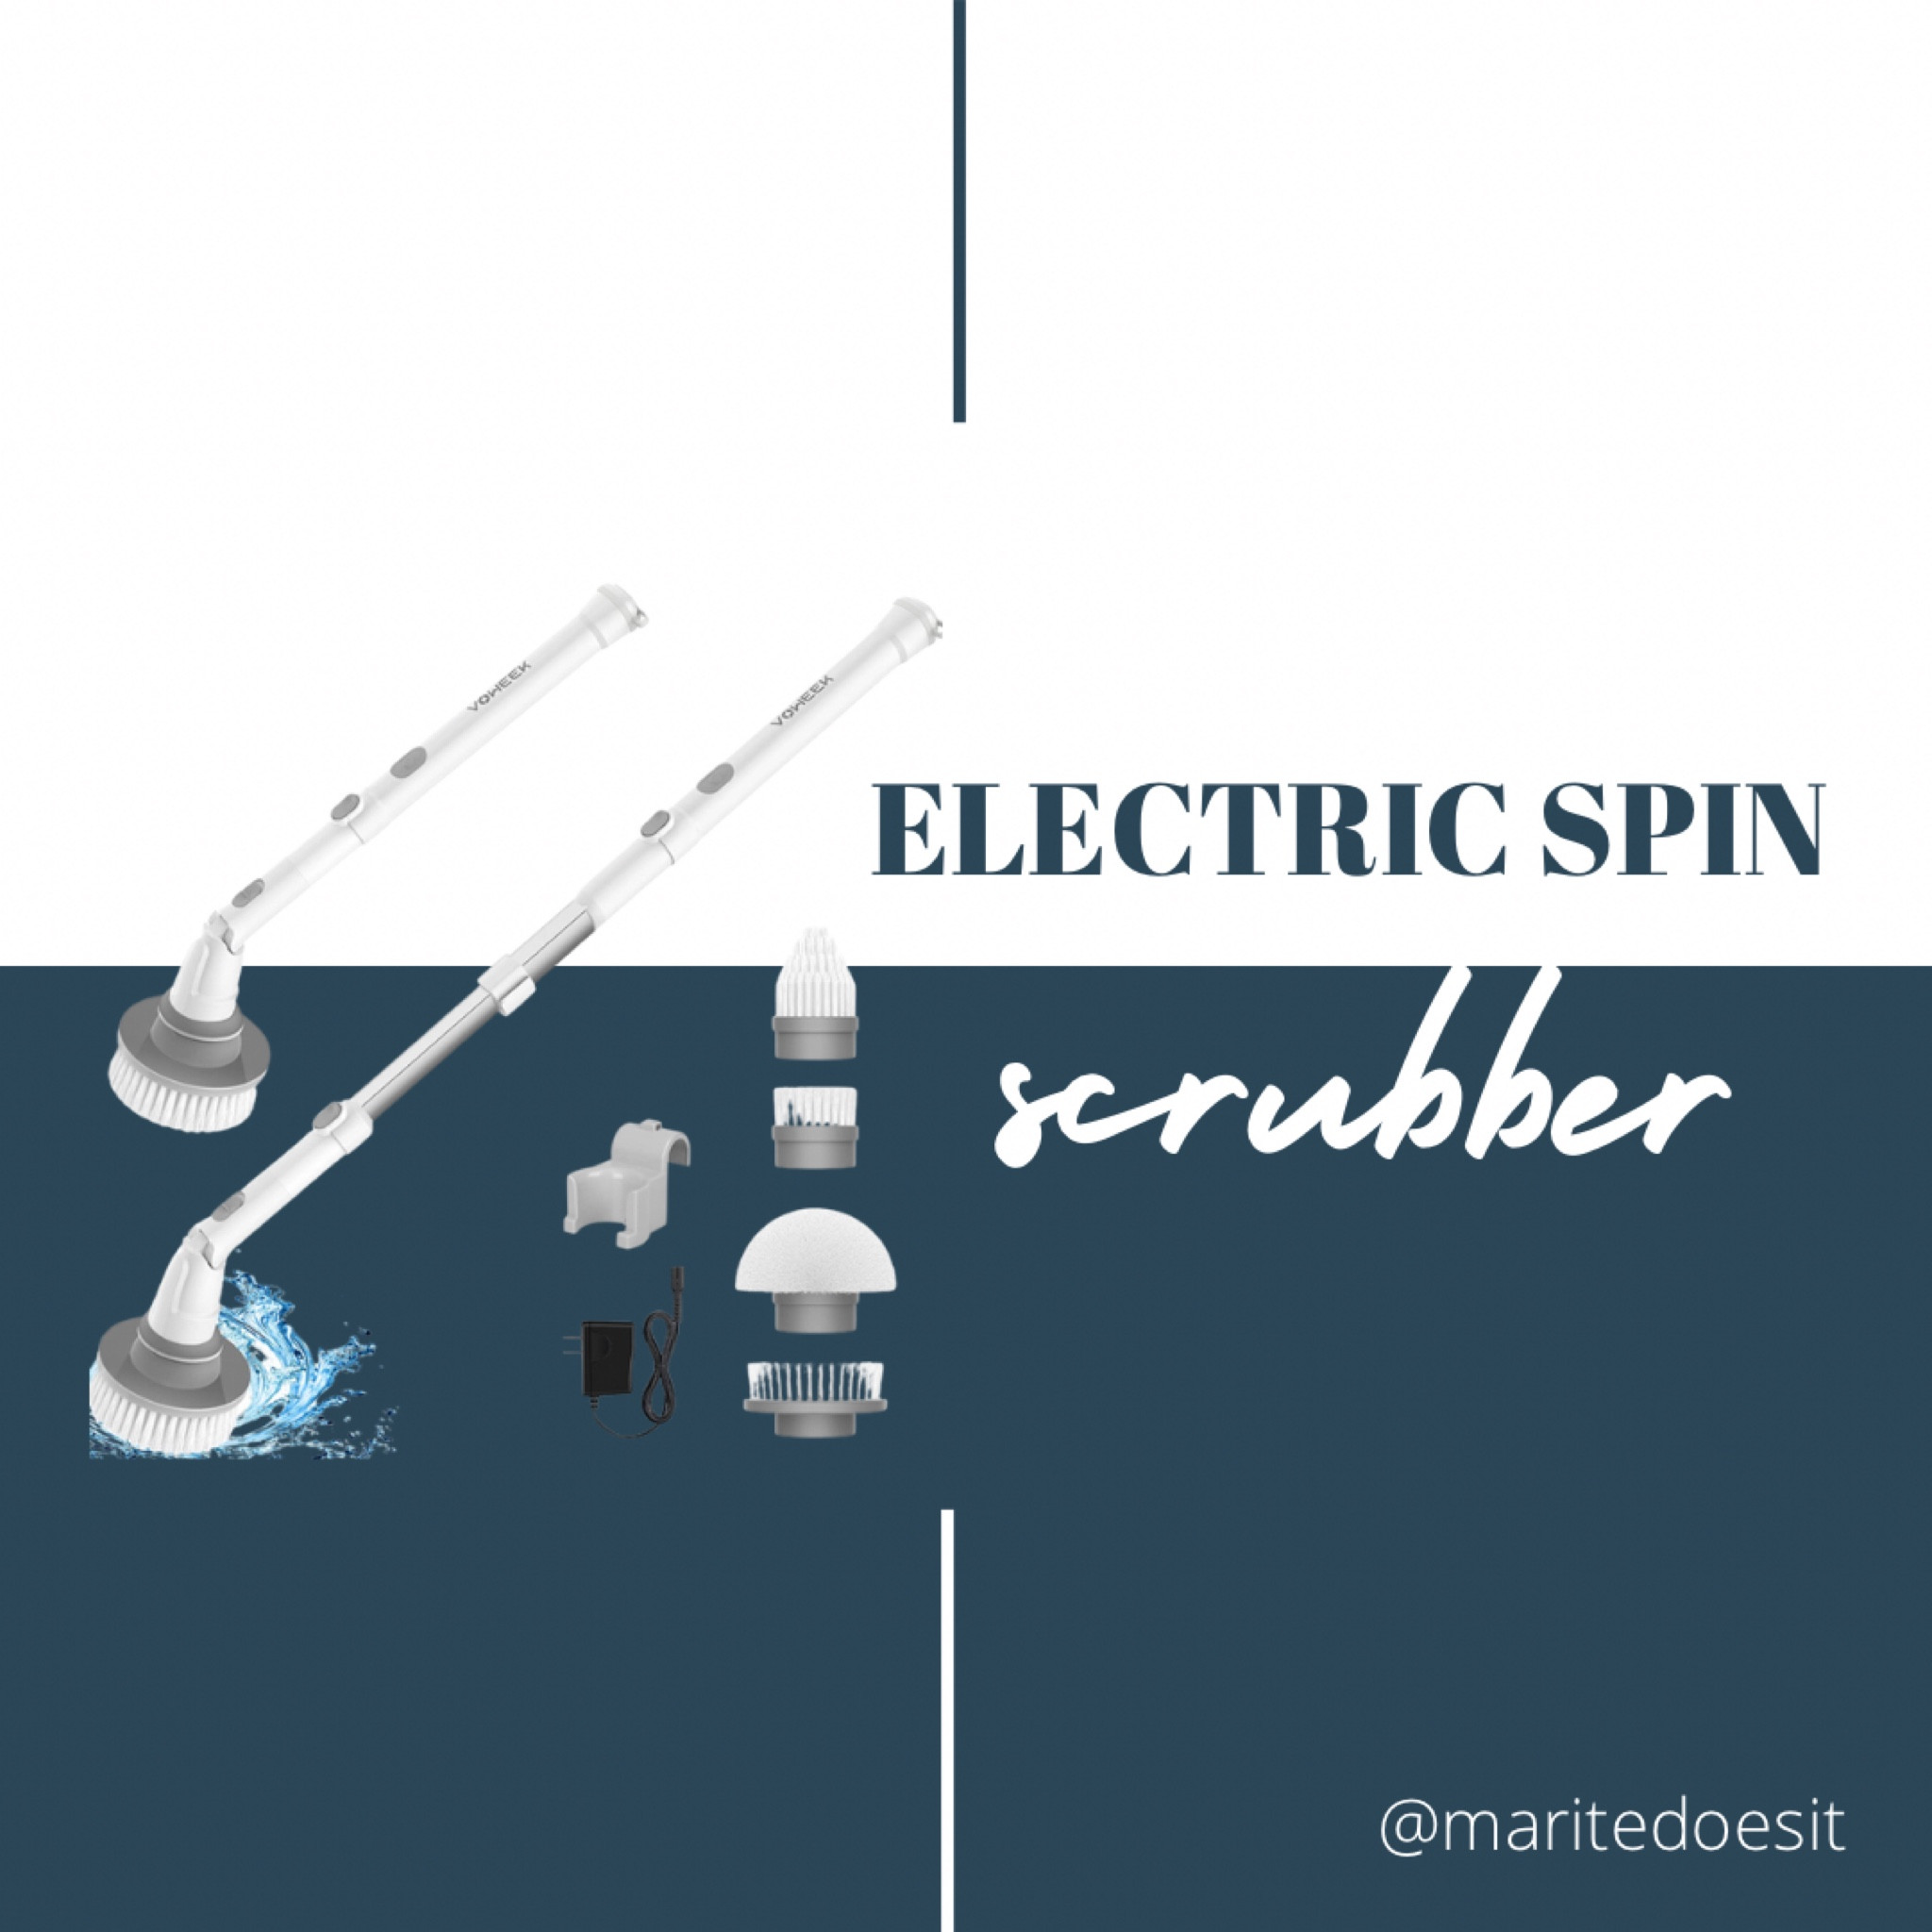 Voweek Electric Spin Scrubber